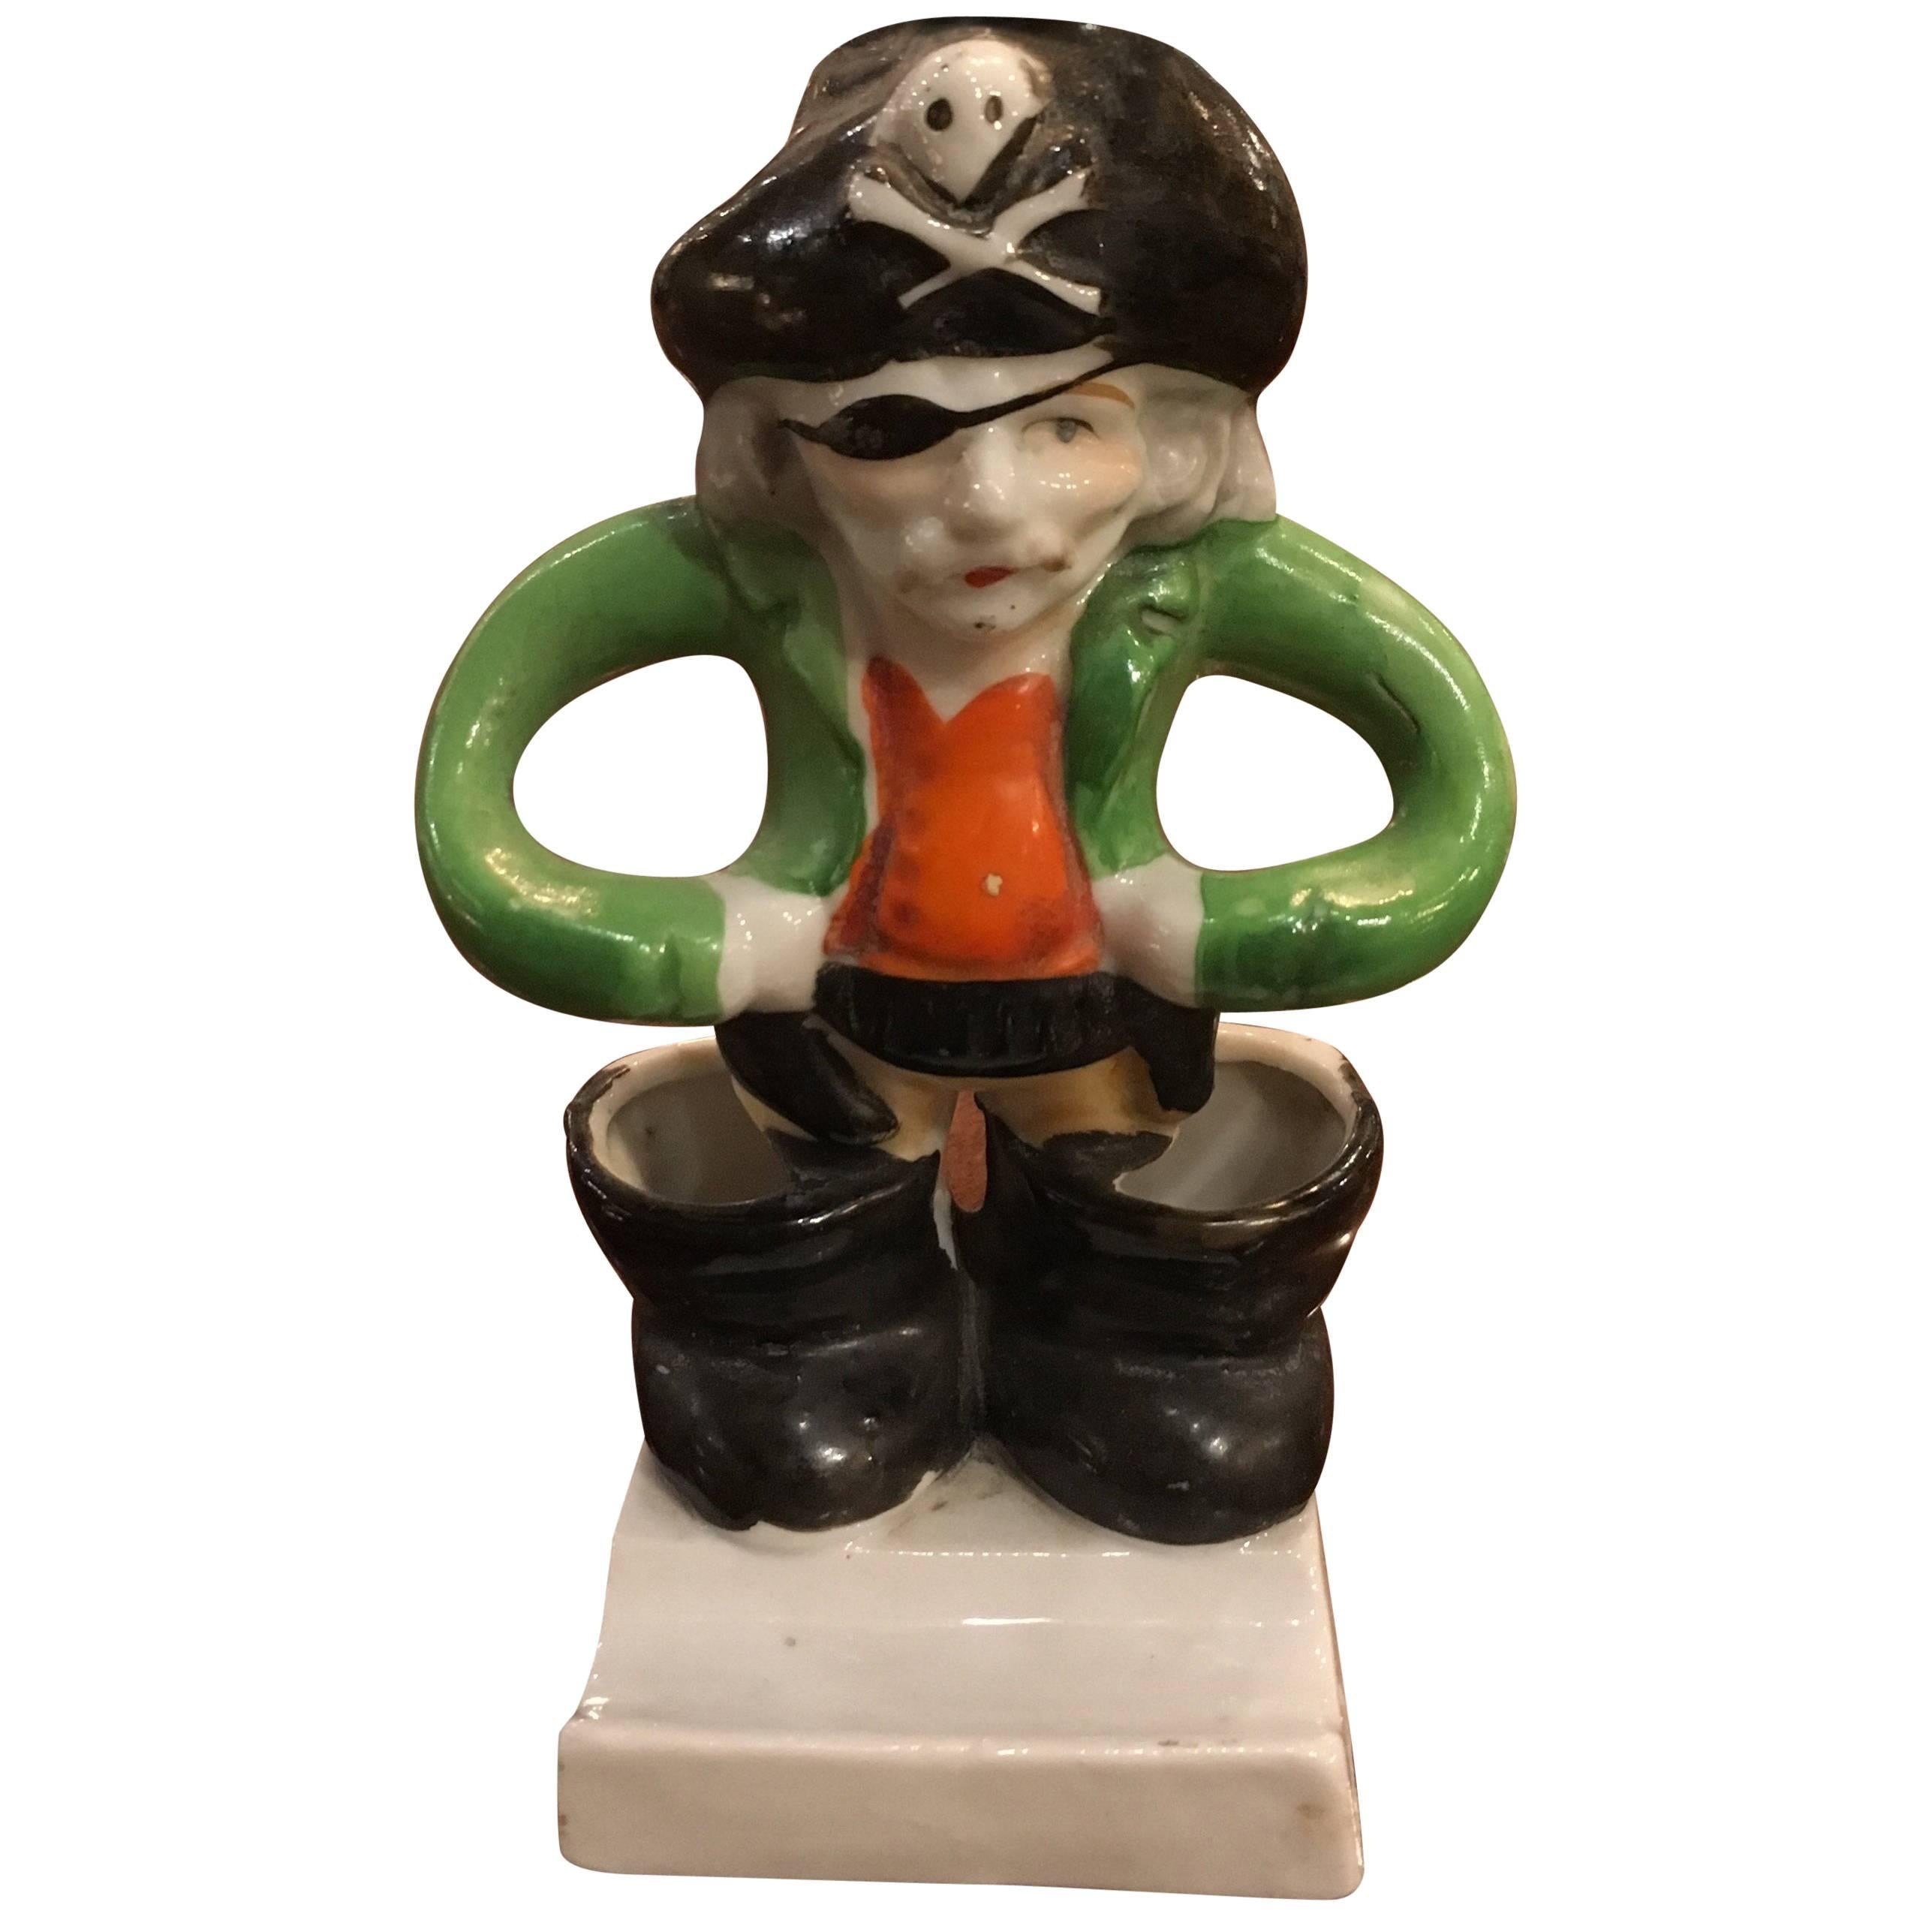 Pirate Toothbrush Holder from Japan